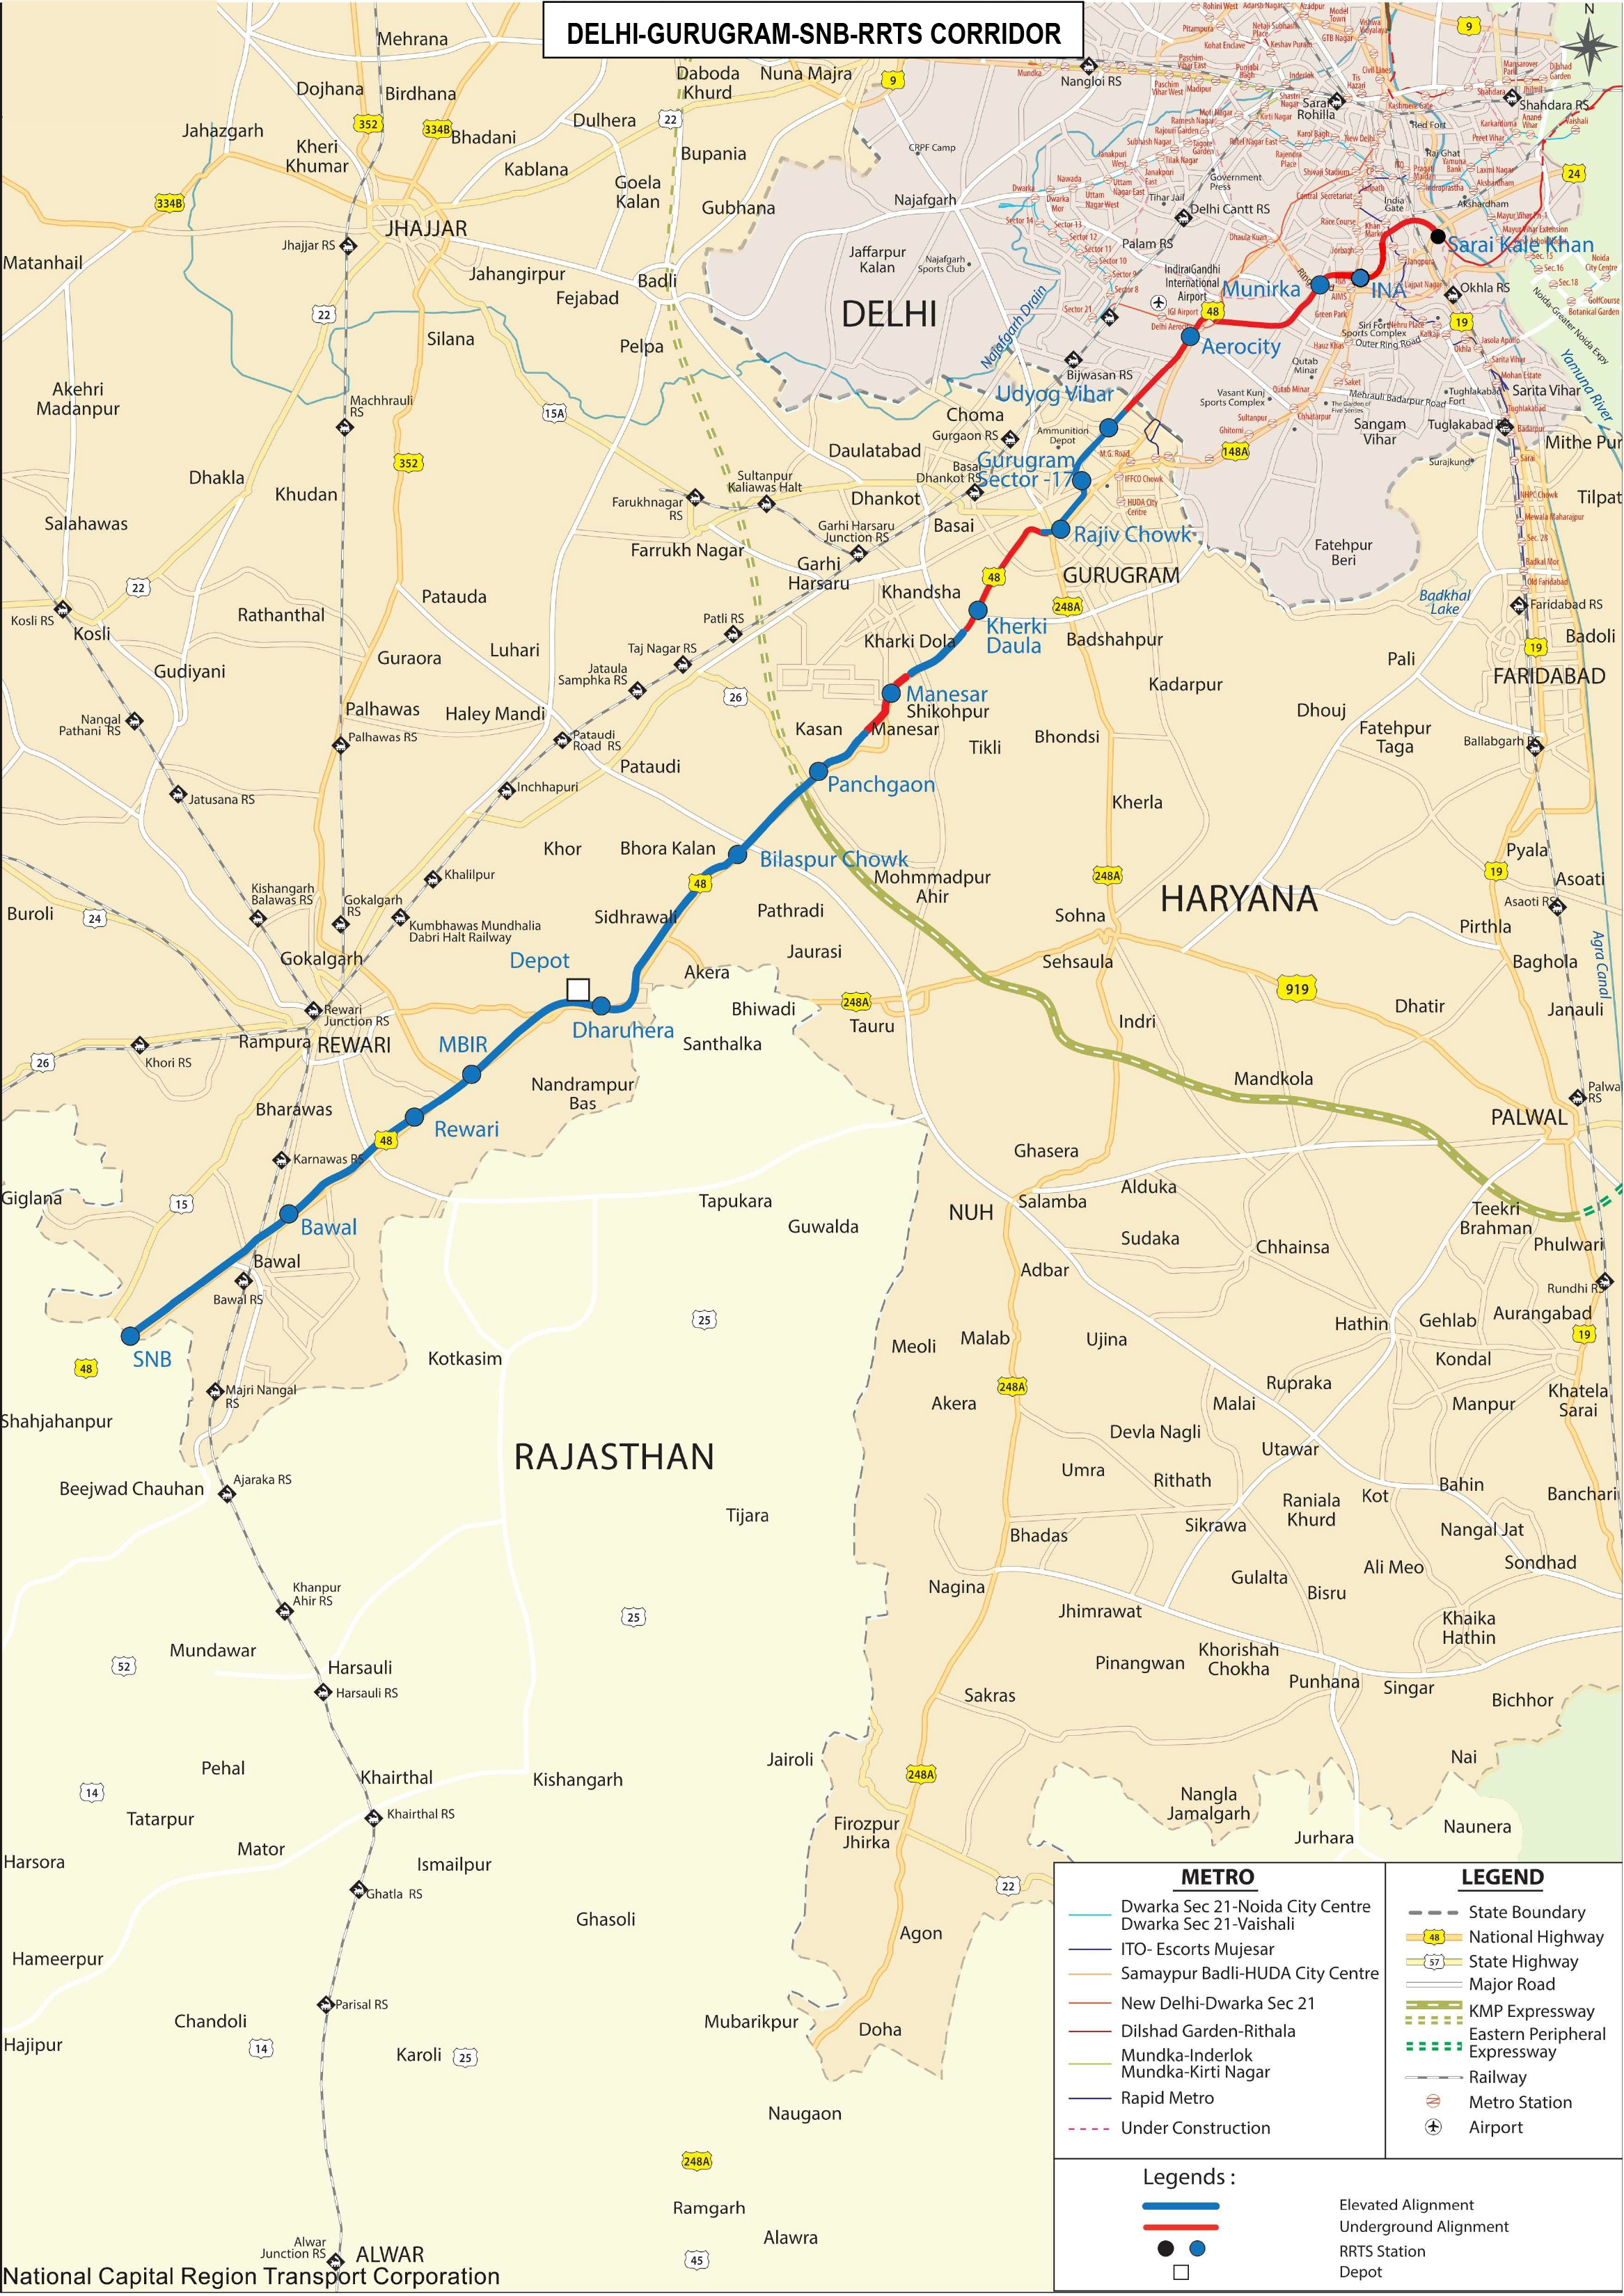 Route map SKK-INA-SNB